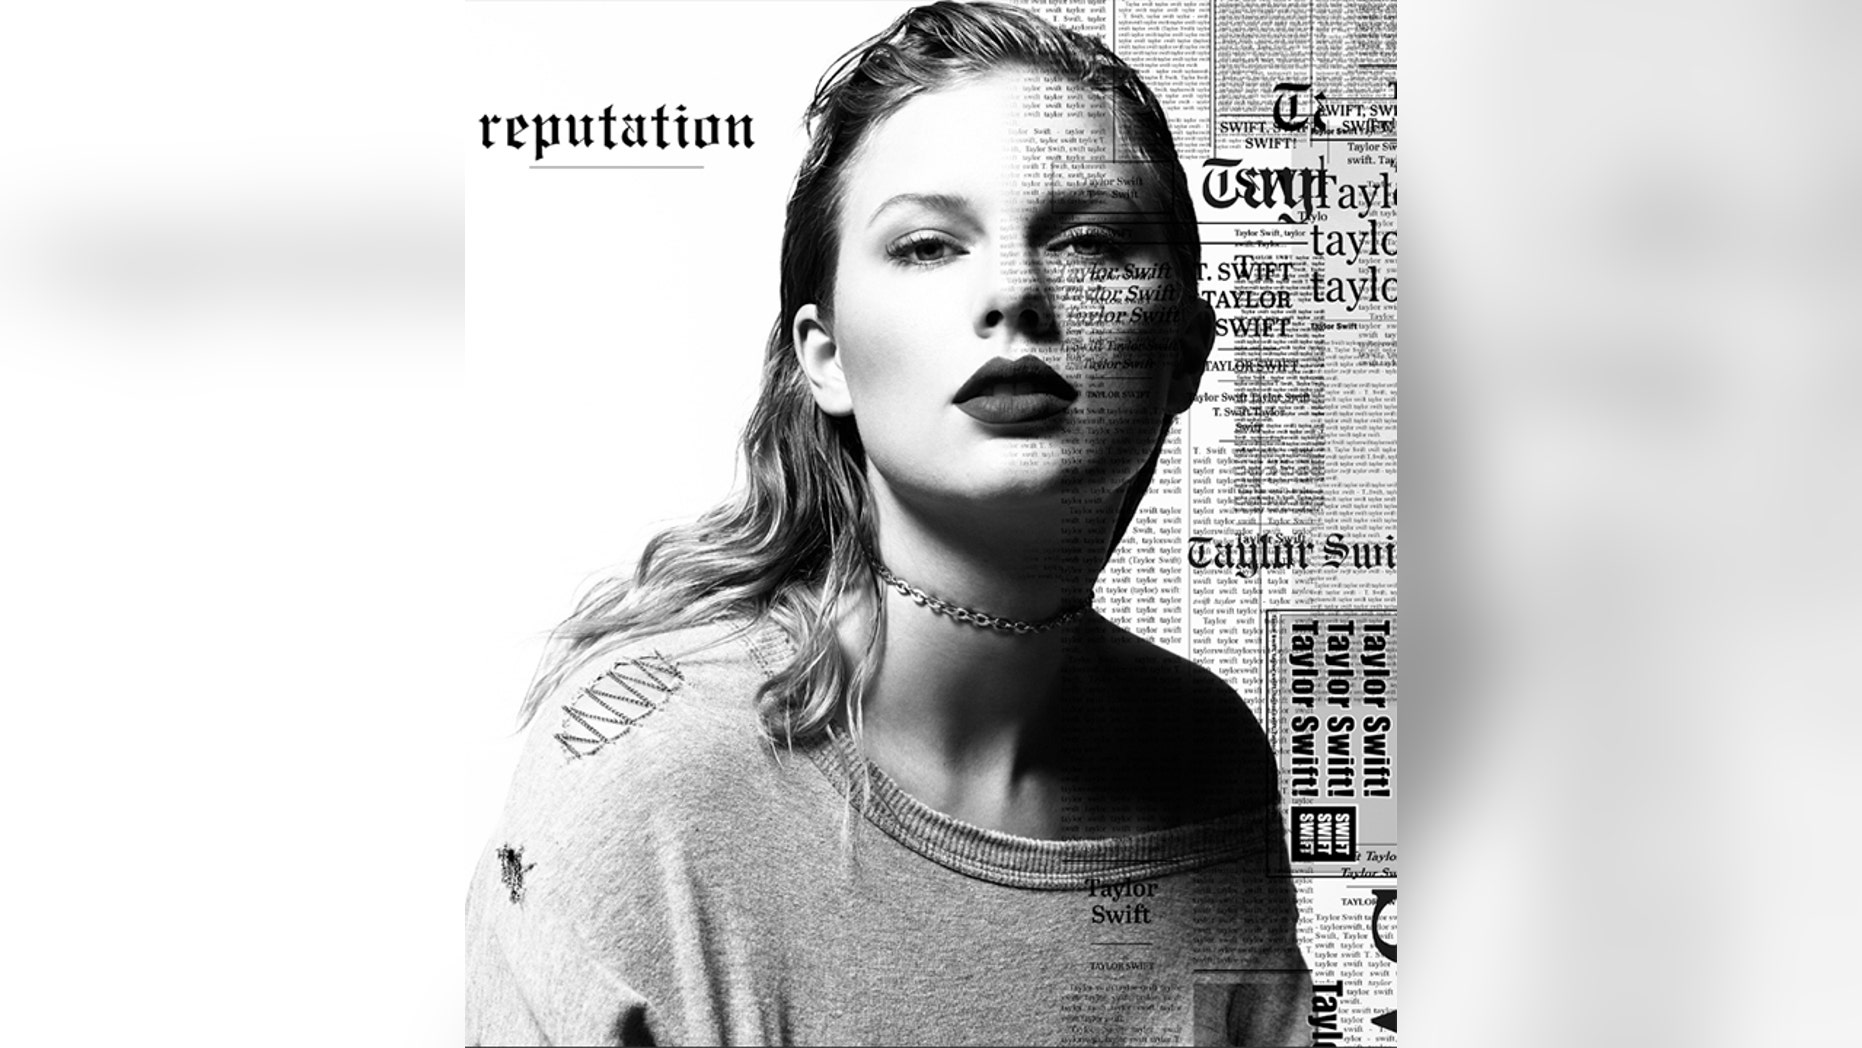 Taylor Swift's 'Reputation' album cover ripped by fans ...